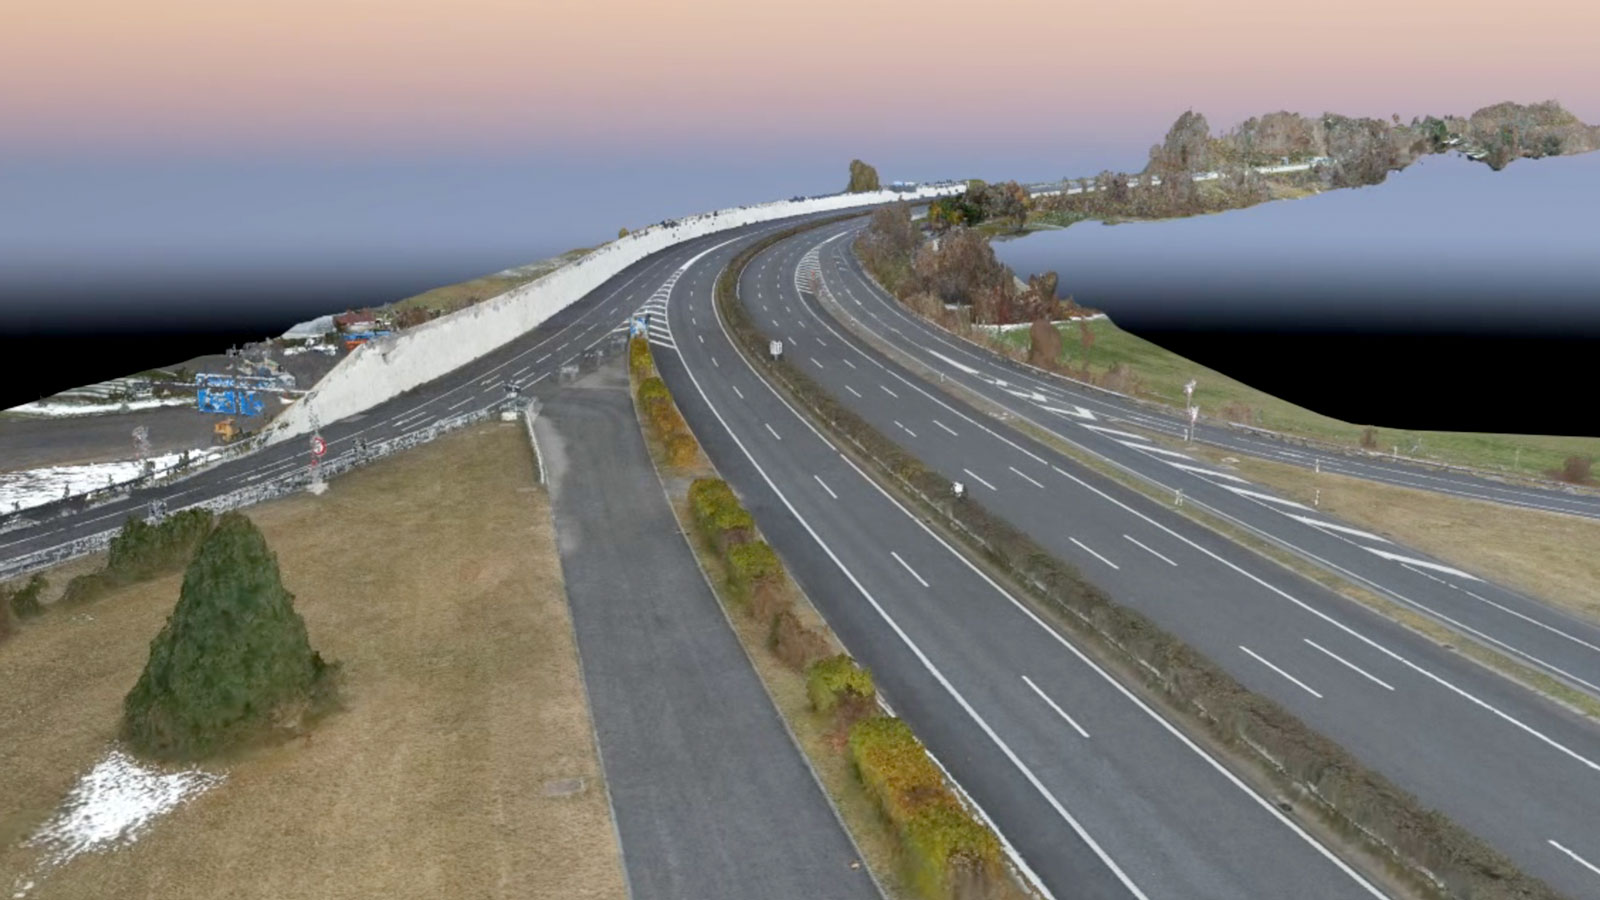 drones to survey a motorway without stopping traffic